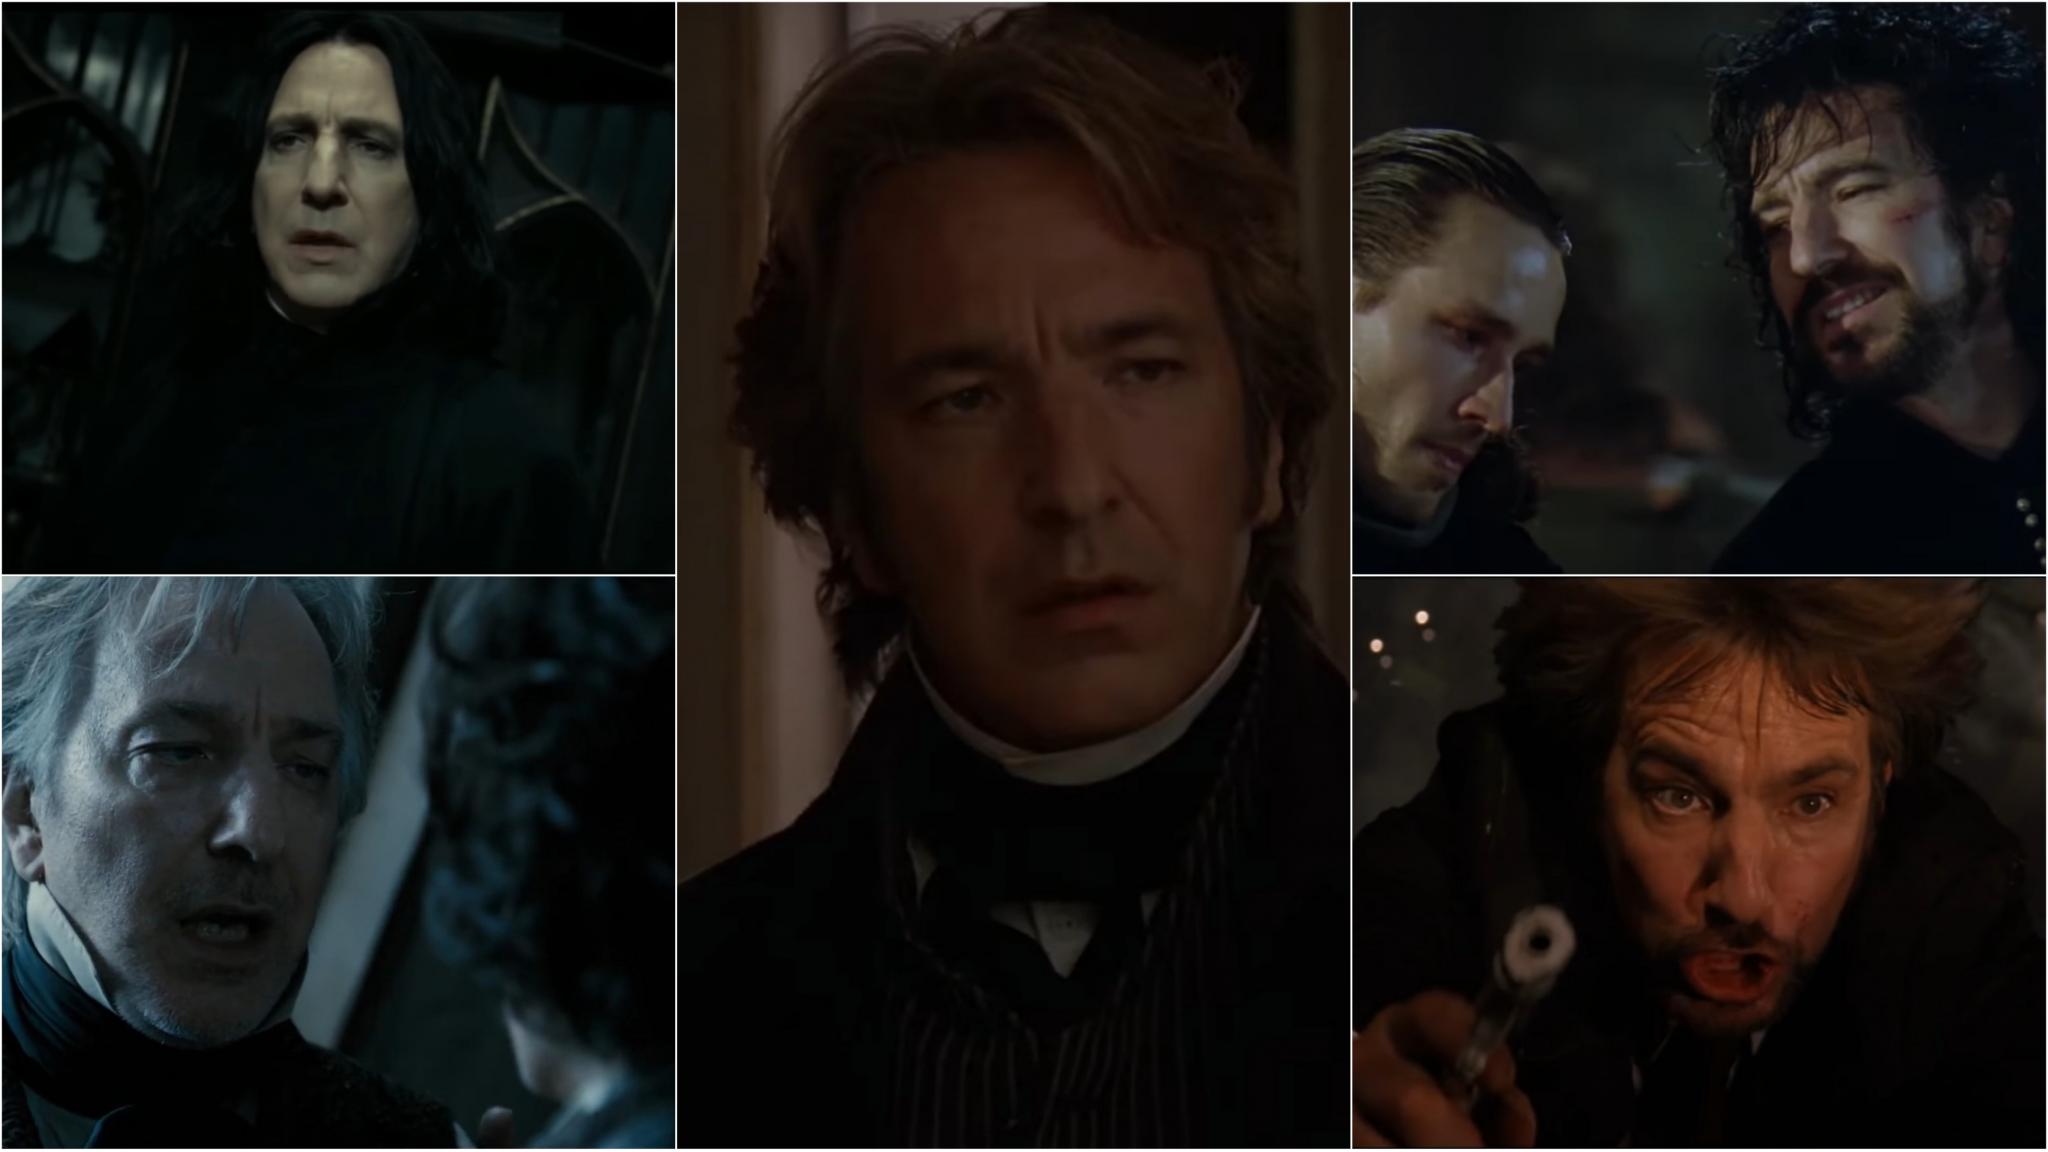 Alan Rickman 11 Most Brilliant Roles, From Hans Gruber to Severus Snape  (Photos) - TheWrap